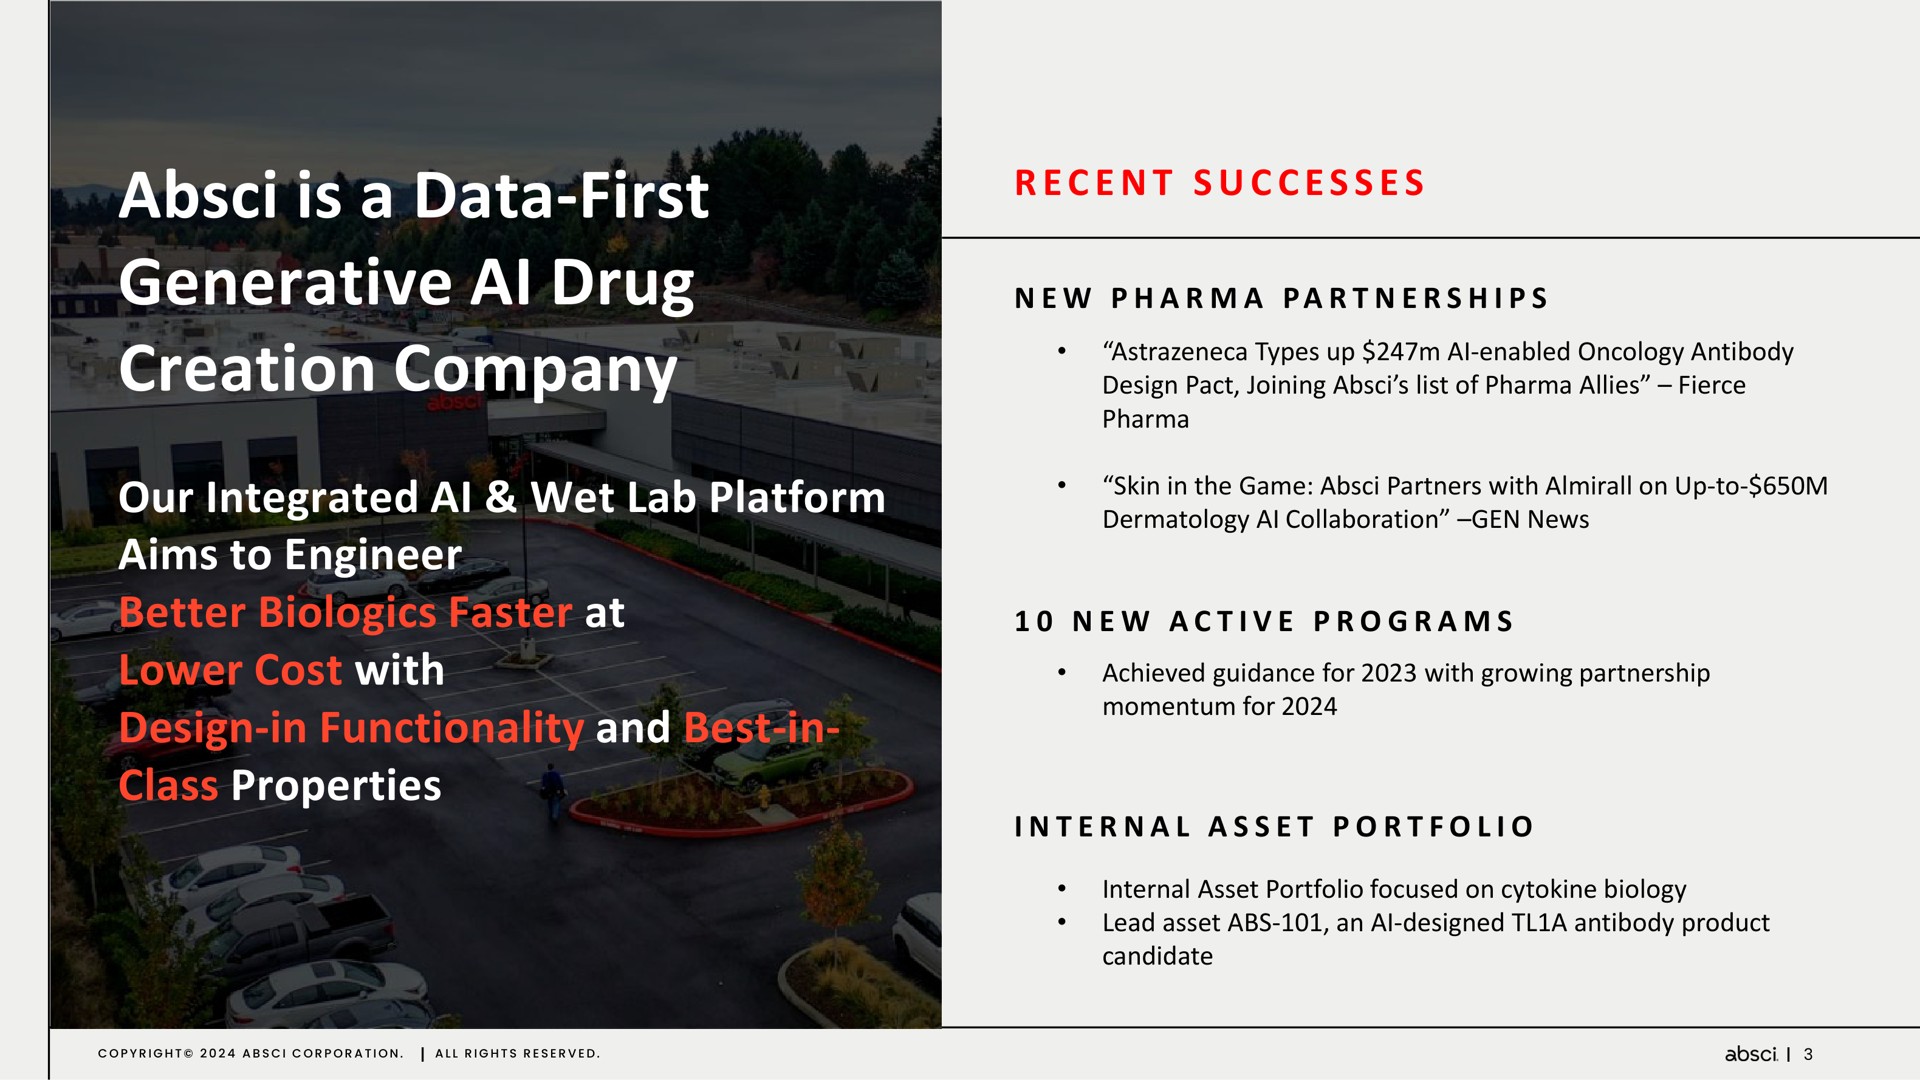 is a data first generative drug creation company our integrated wet lab platform aims to engineer better faster at lower cost with design in functionality and best in class properties recent successes | Absci